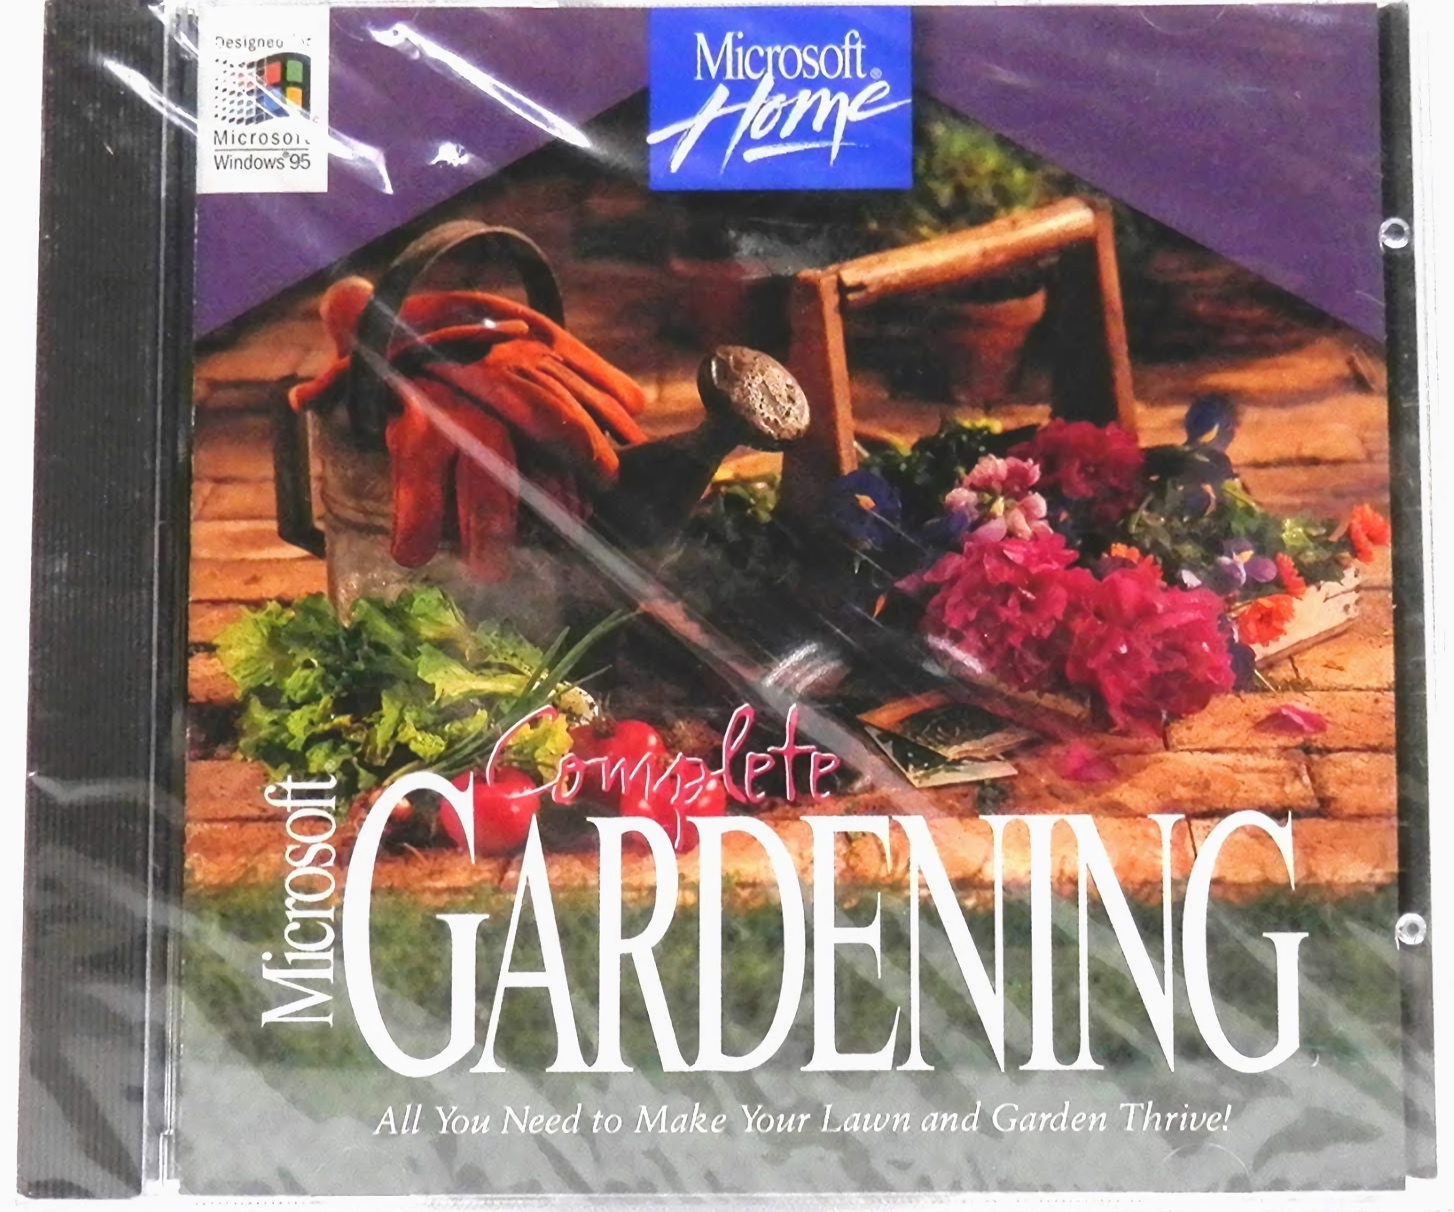 Microsoft Complete Gardening Box Cover (1996)